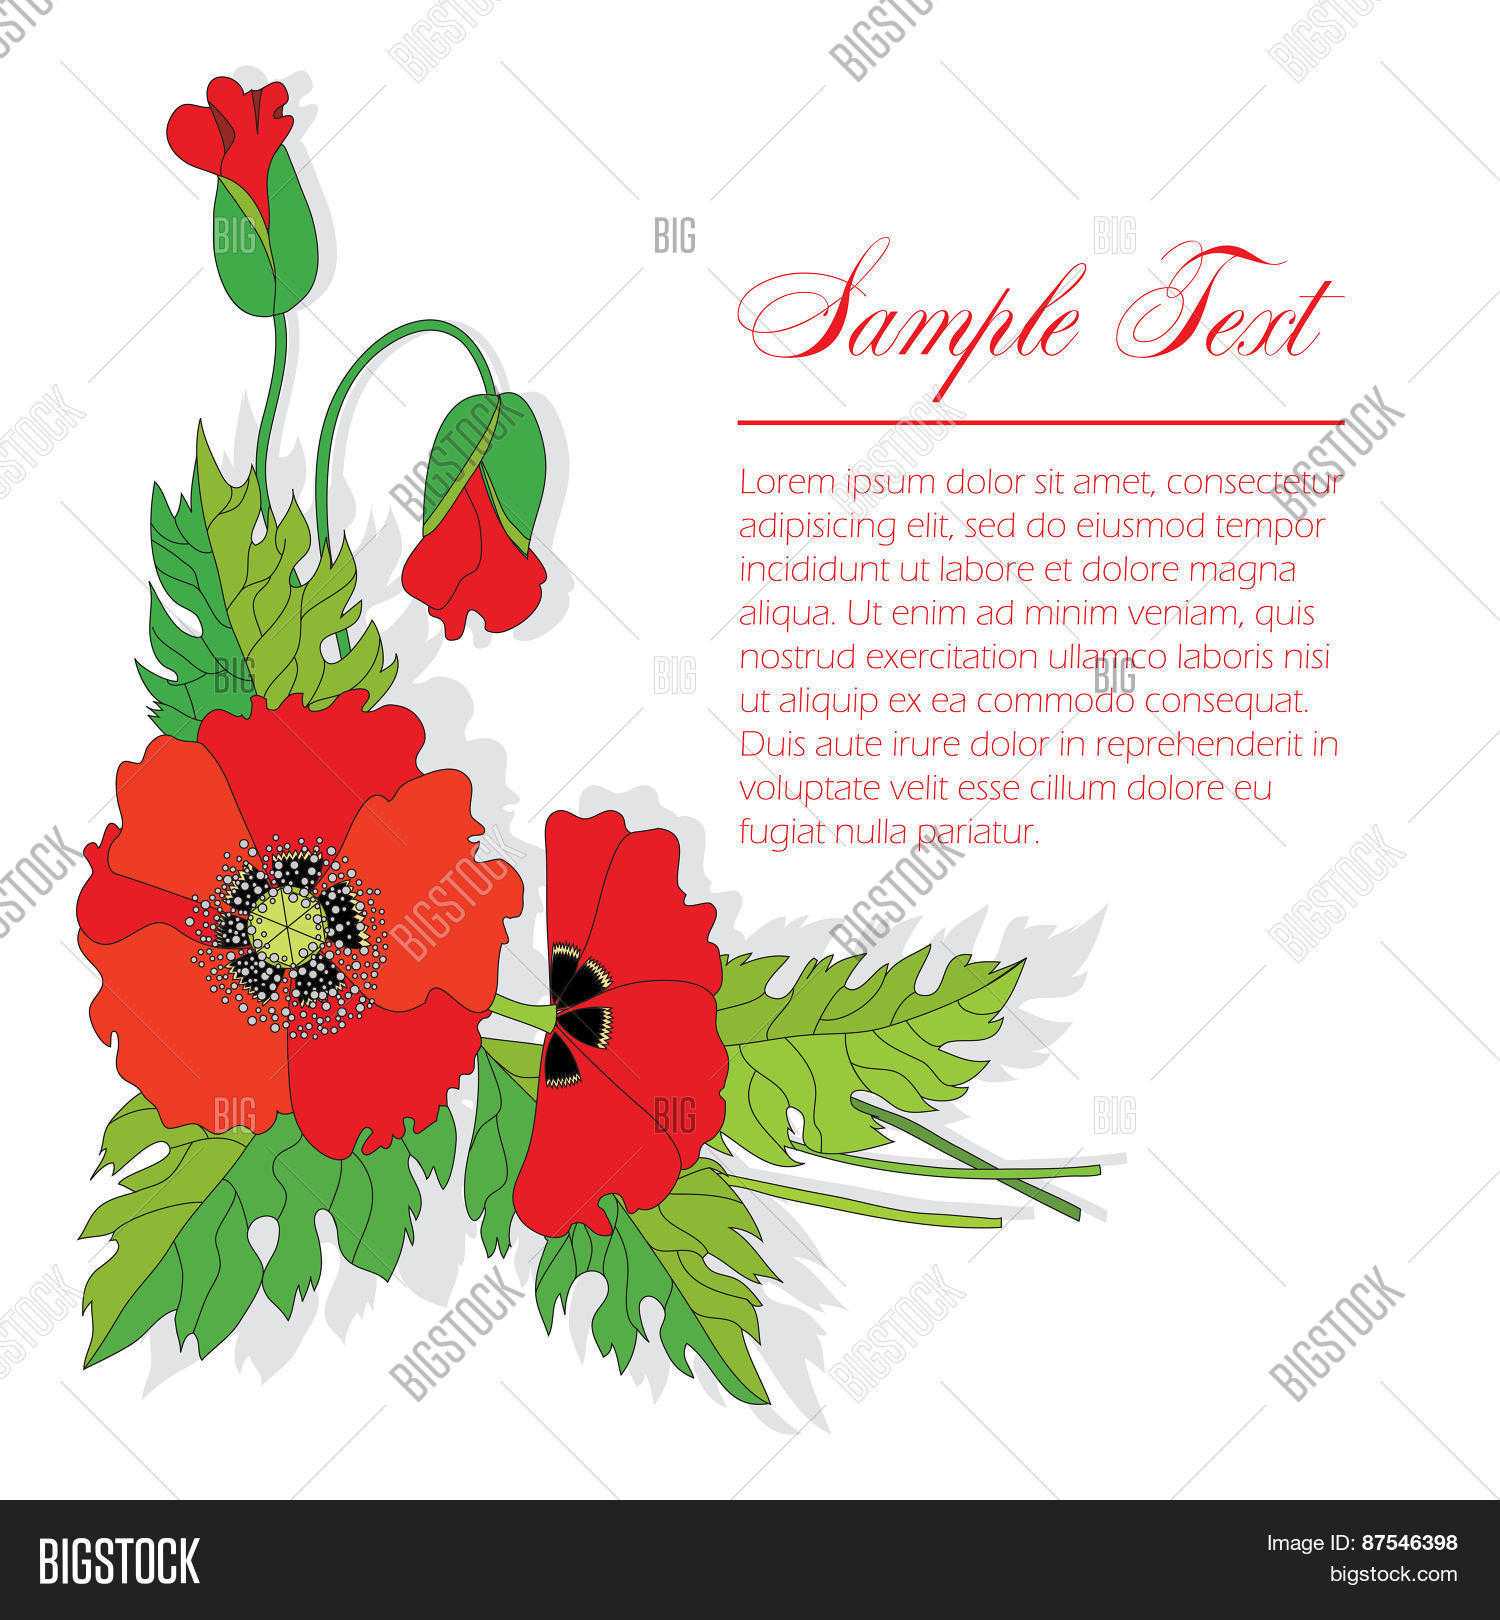 Bouquet Poppies Vector & Photo (Free Trial) | Bigstock In Congratulations Banner Template